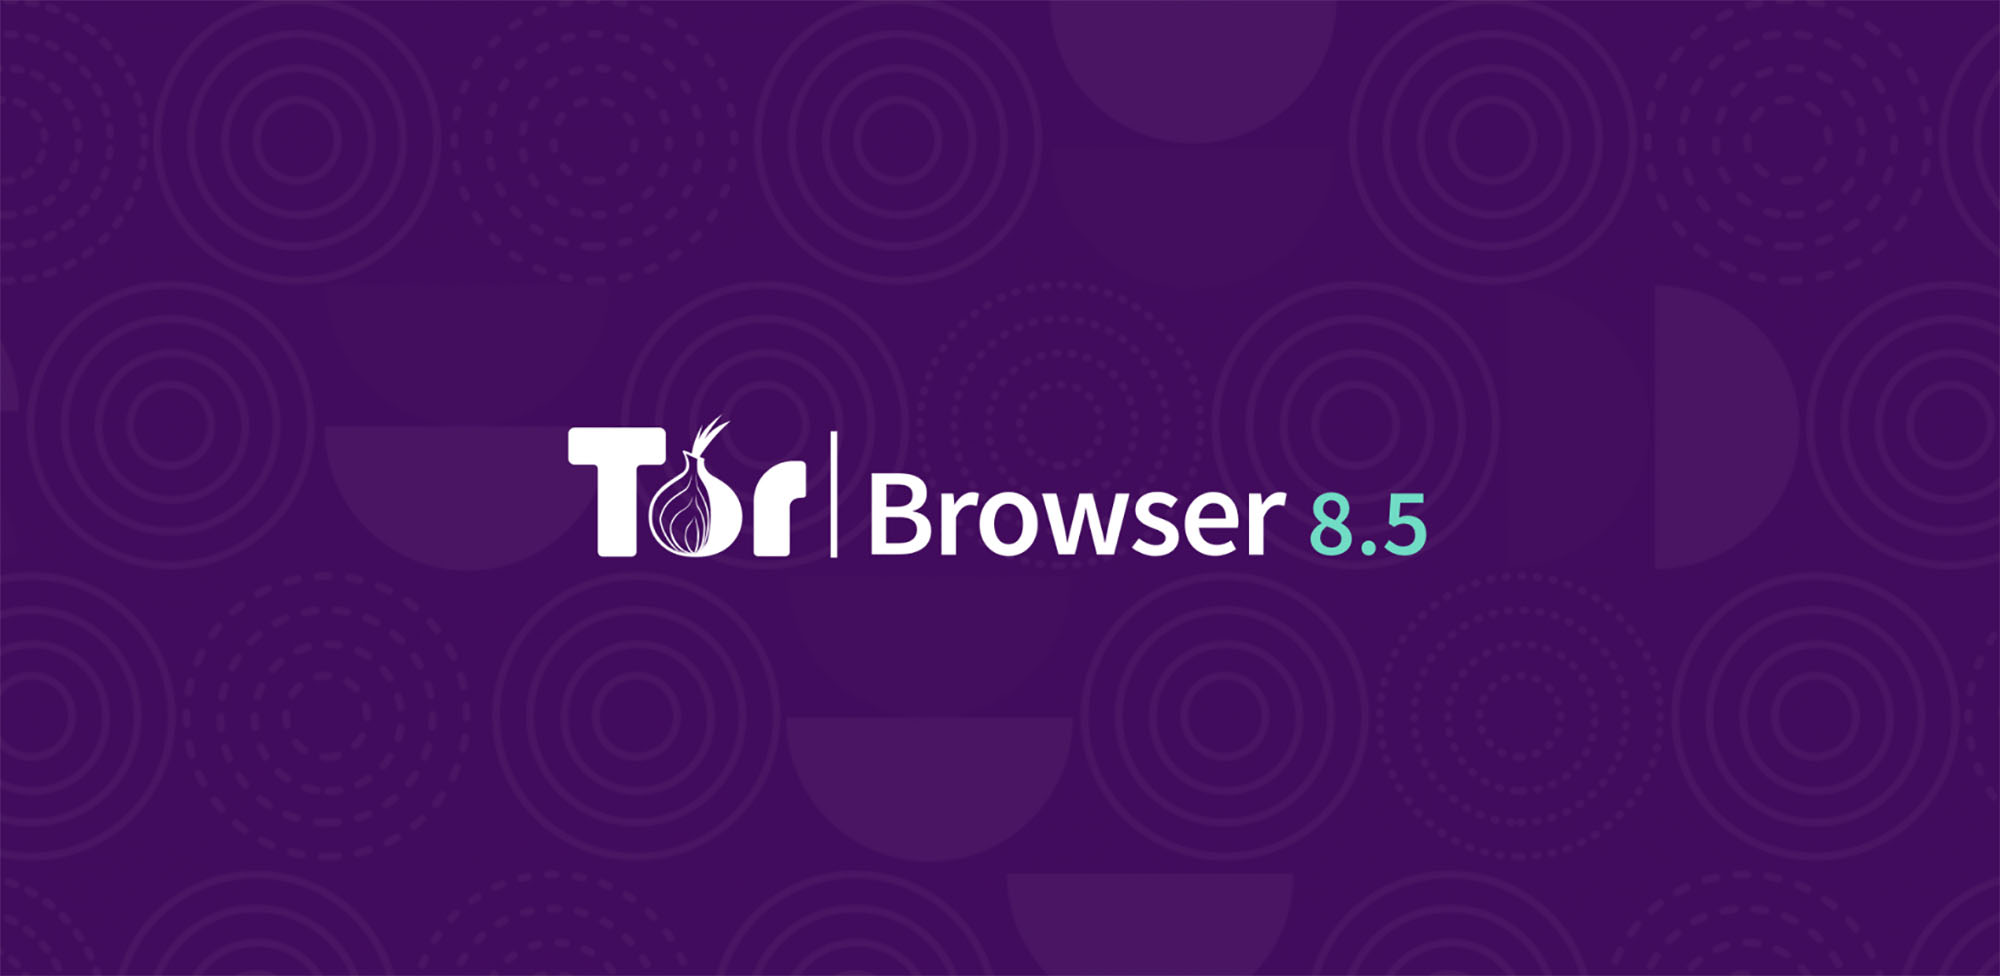 tor browser android app 2019